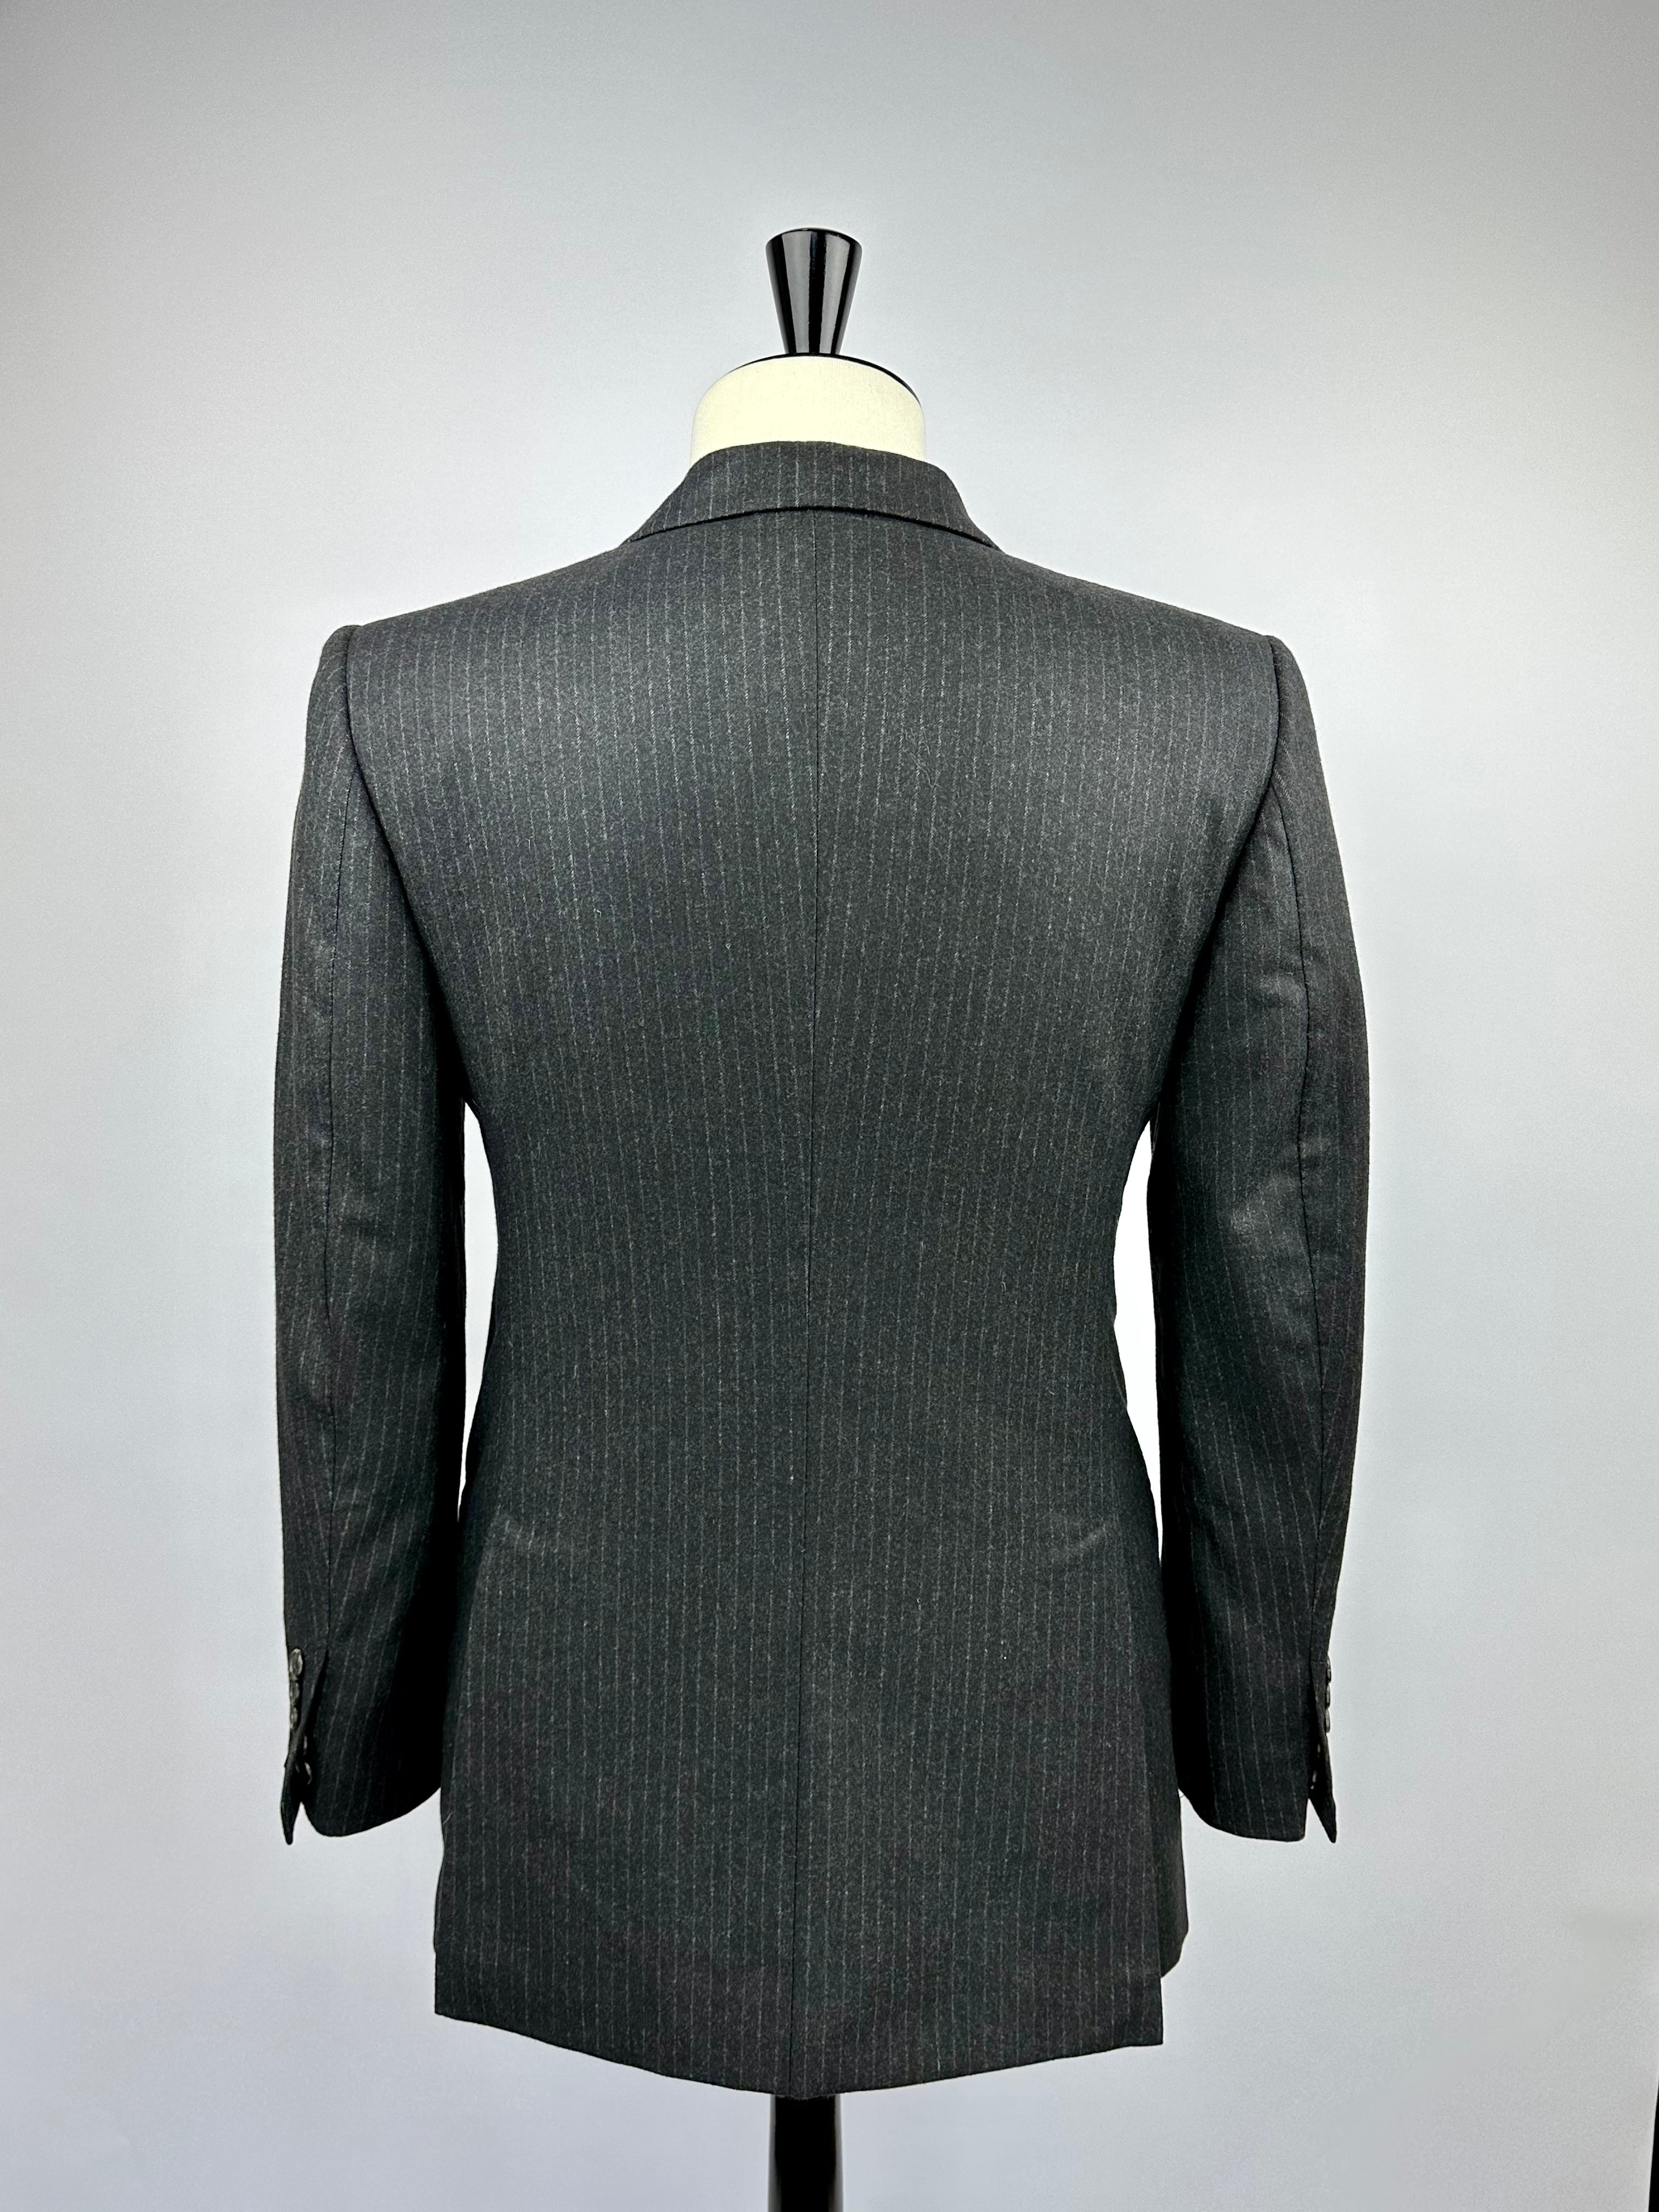 Tom Ford Pinstripe Flannel Suit